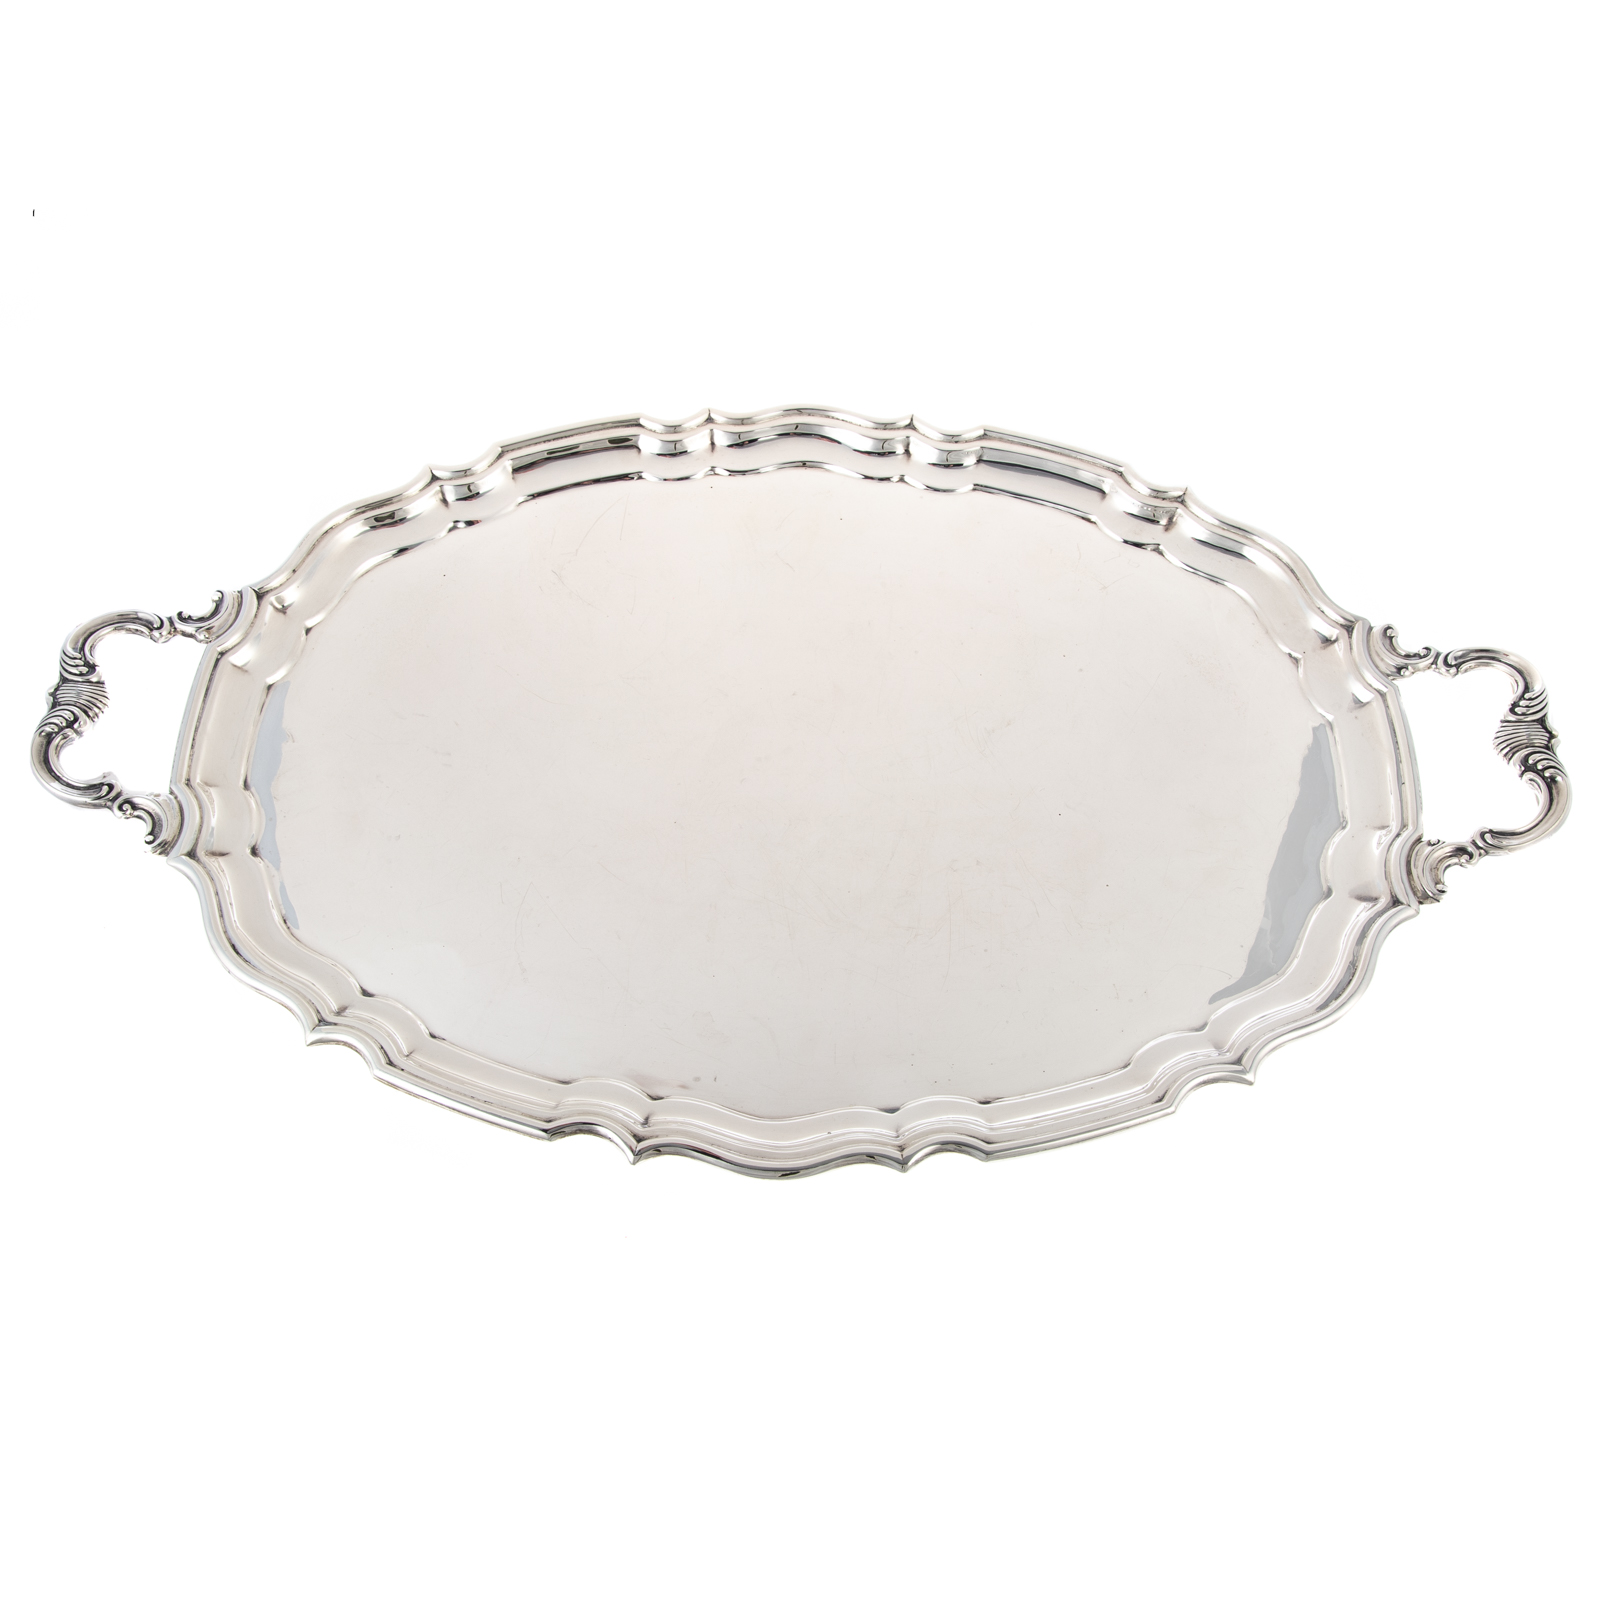 CANADIAN STERLING SERVING TRAY 2e9ff9